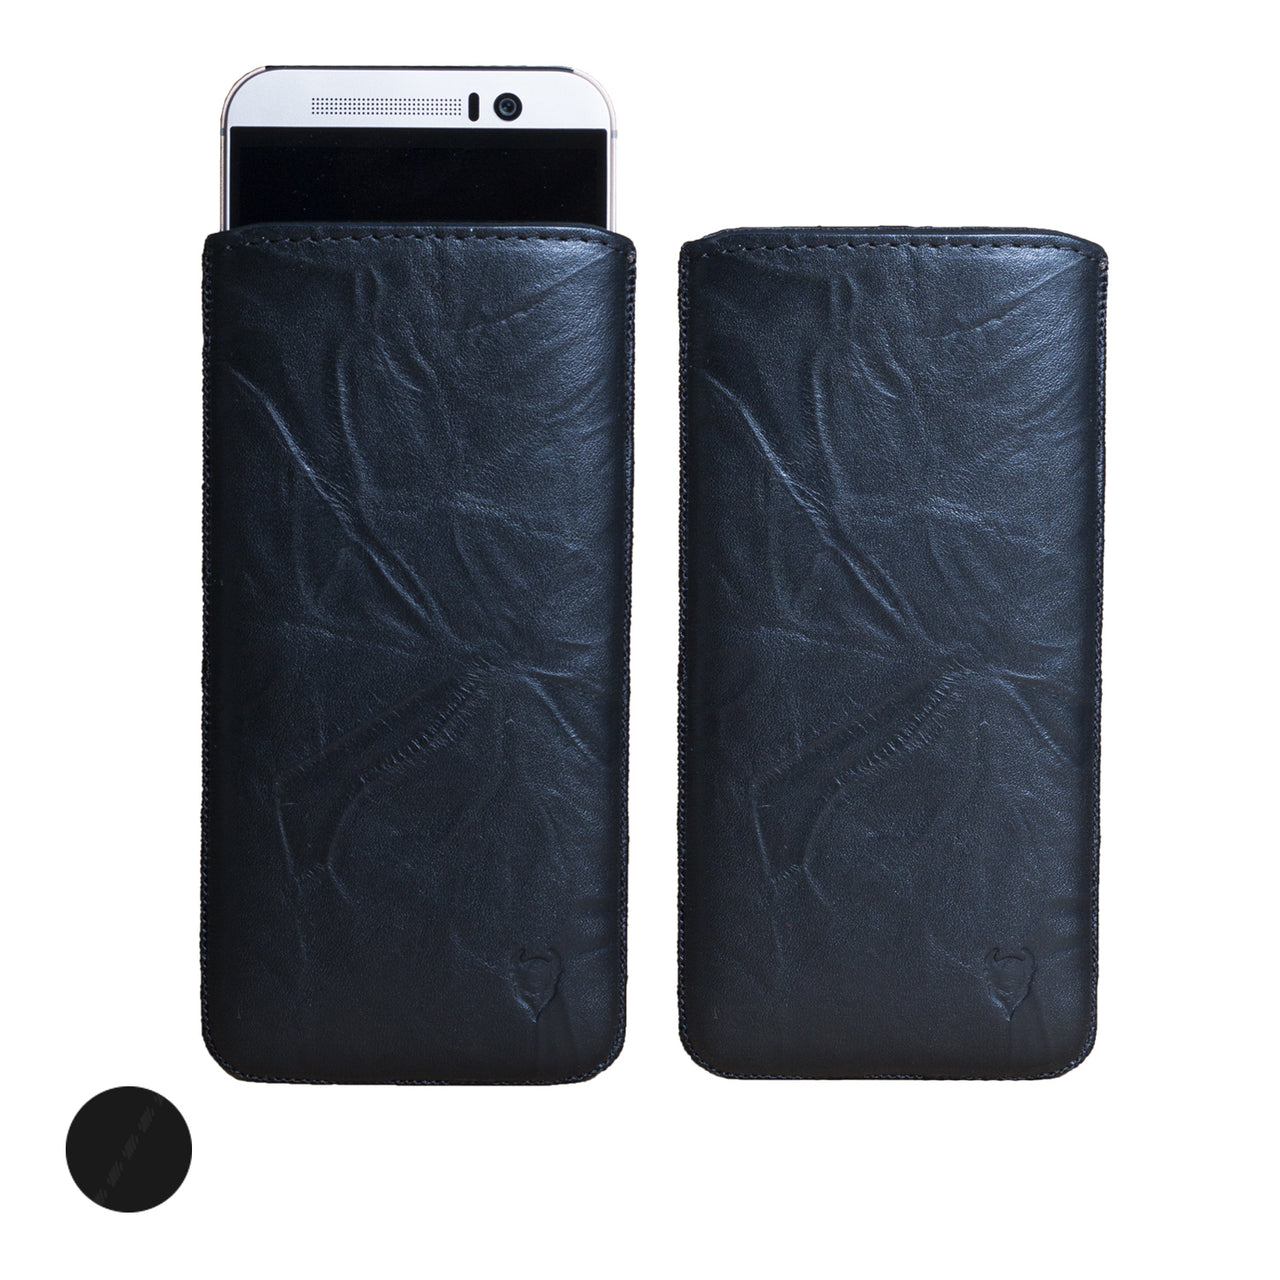 Huawei P10 Genuine Leather Pouch Sleeve Case | Artisanpouch